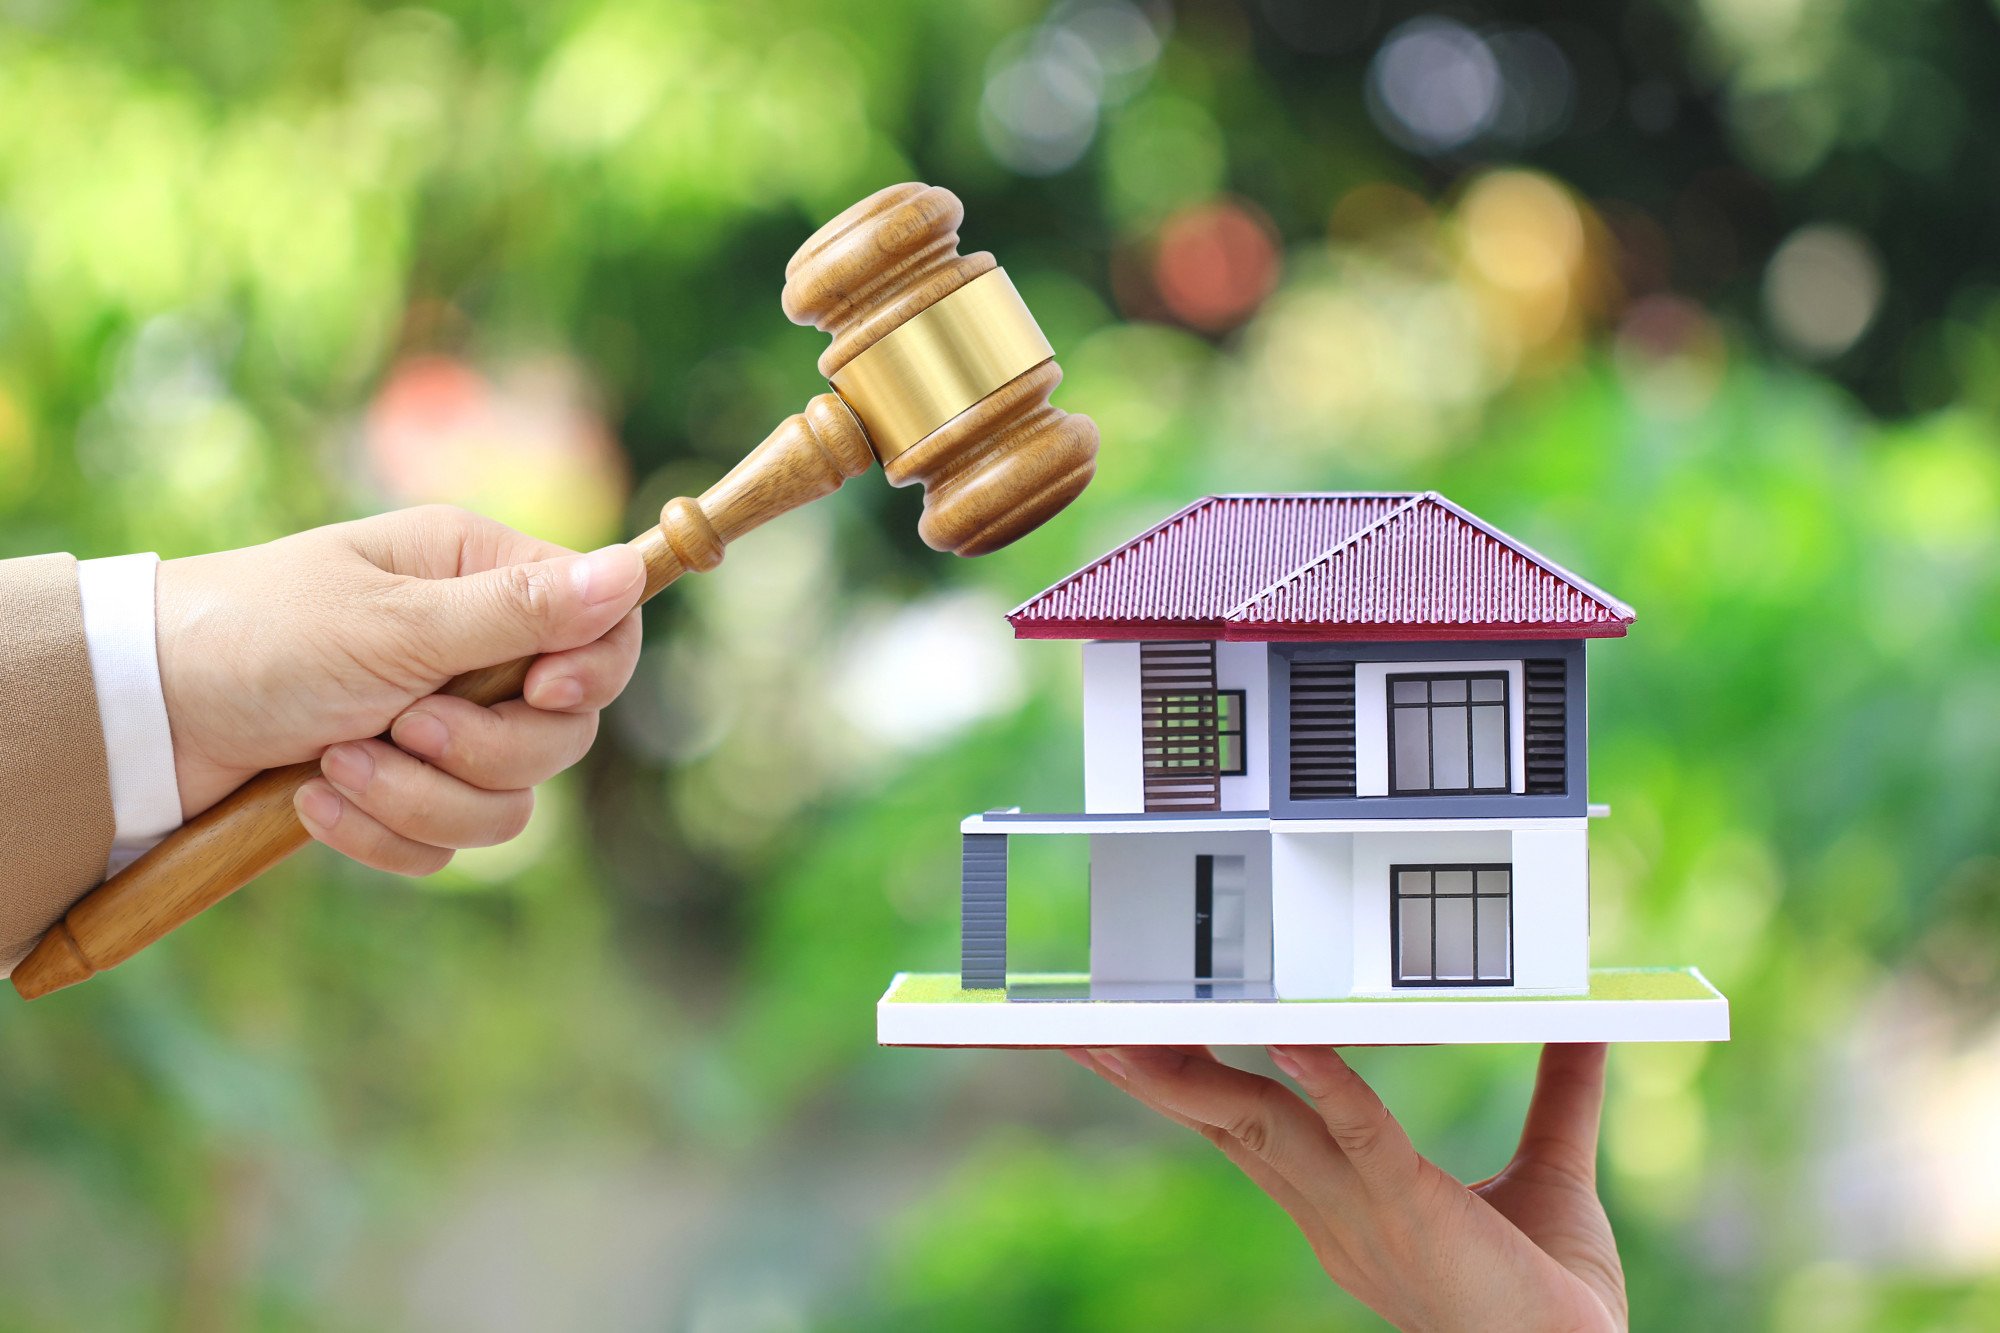 Real Estate Auctions: Buying and Selling Properties in Irvine, CA With Confidence